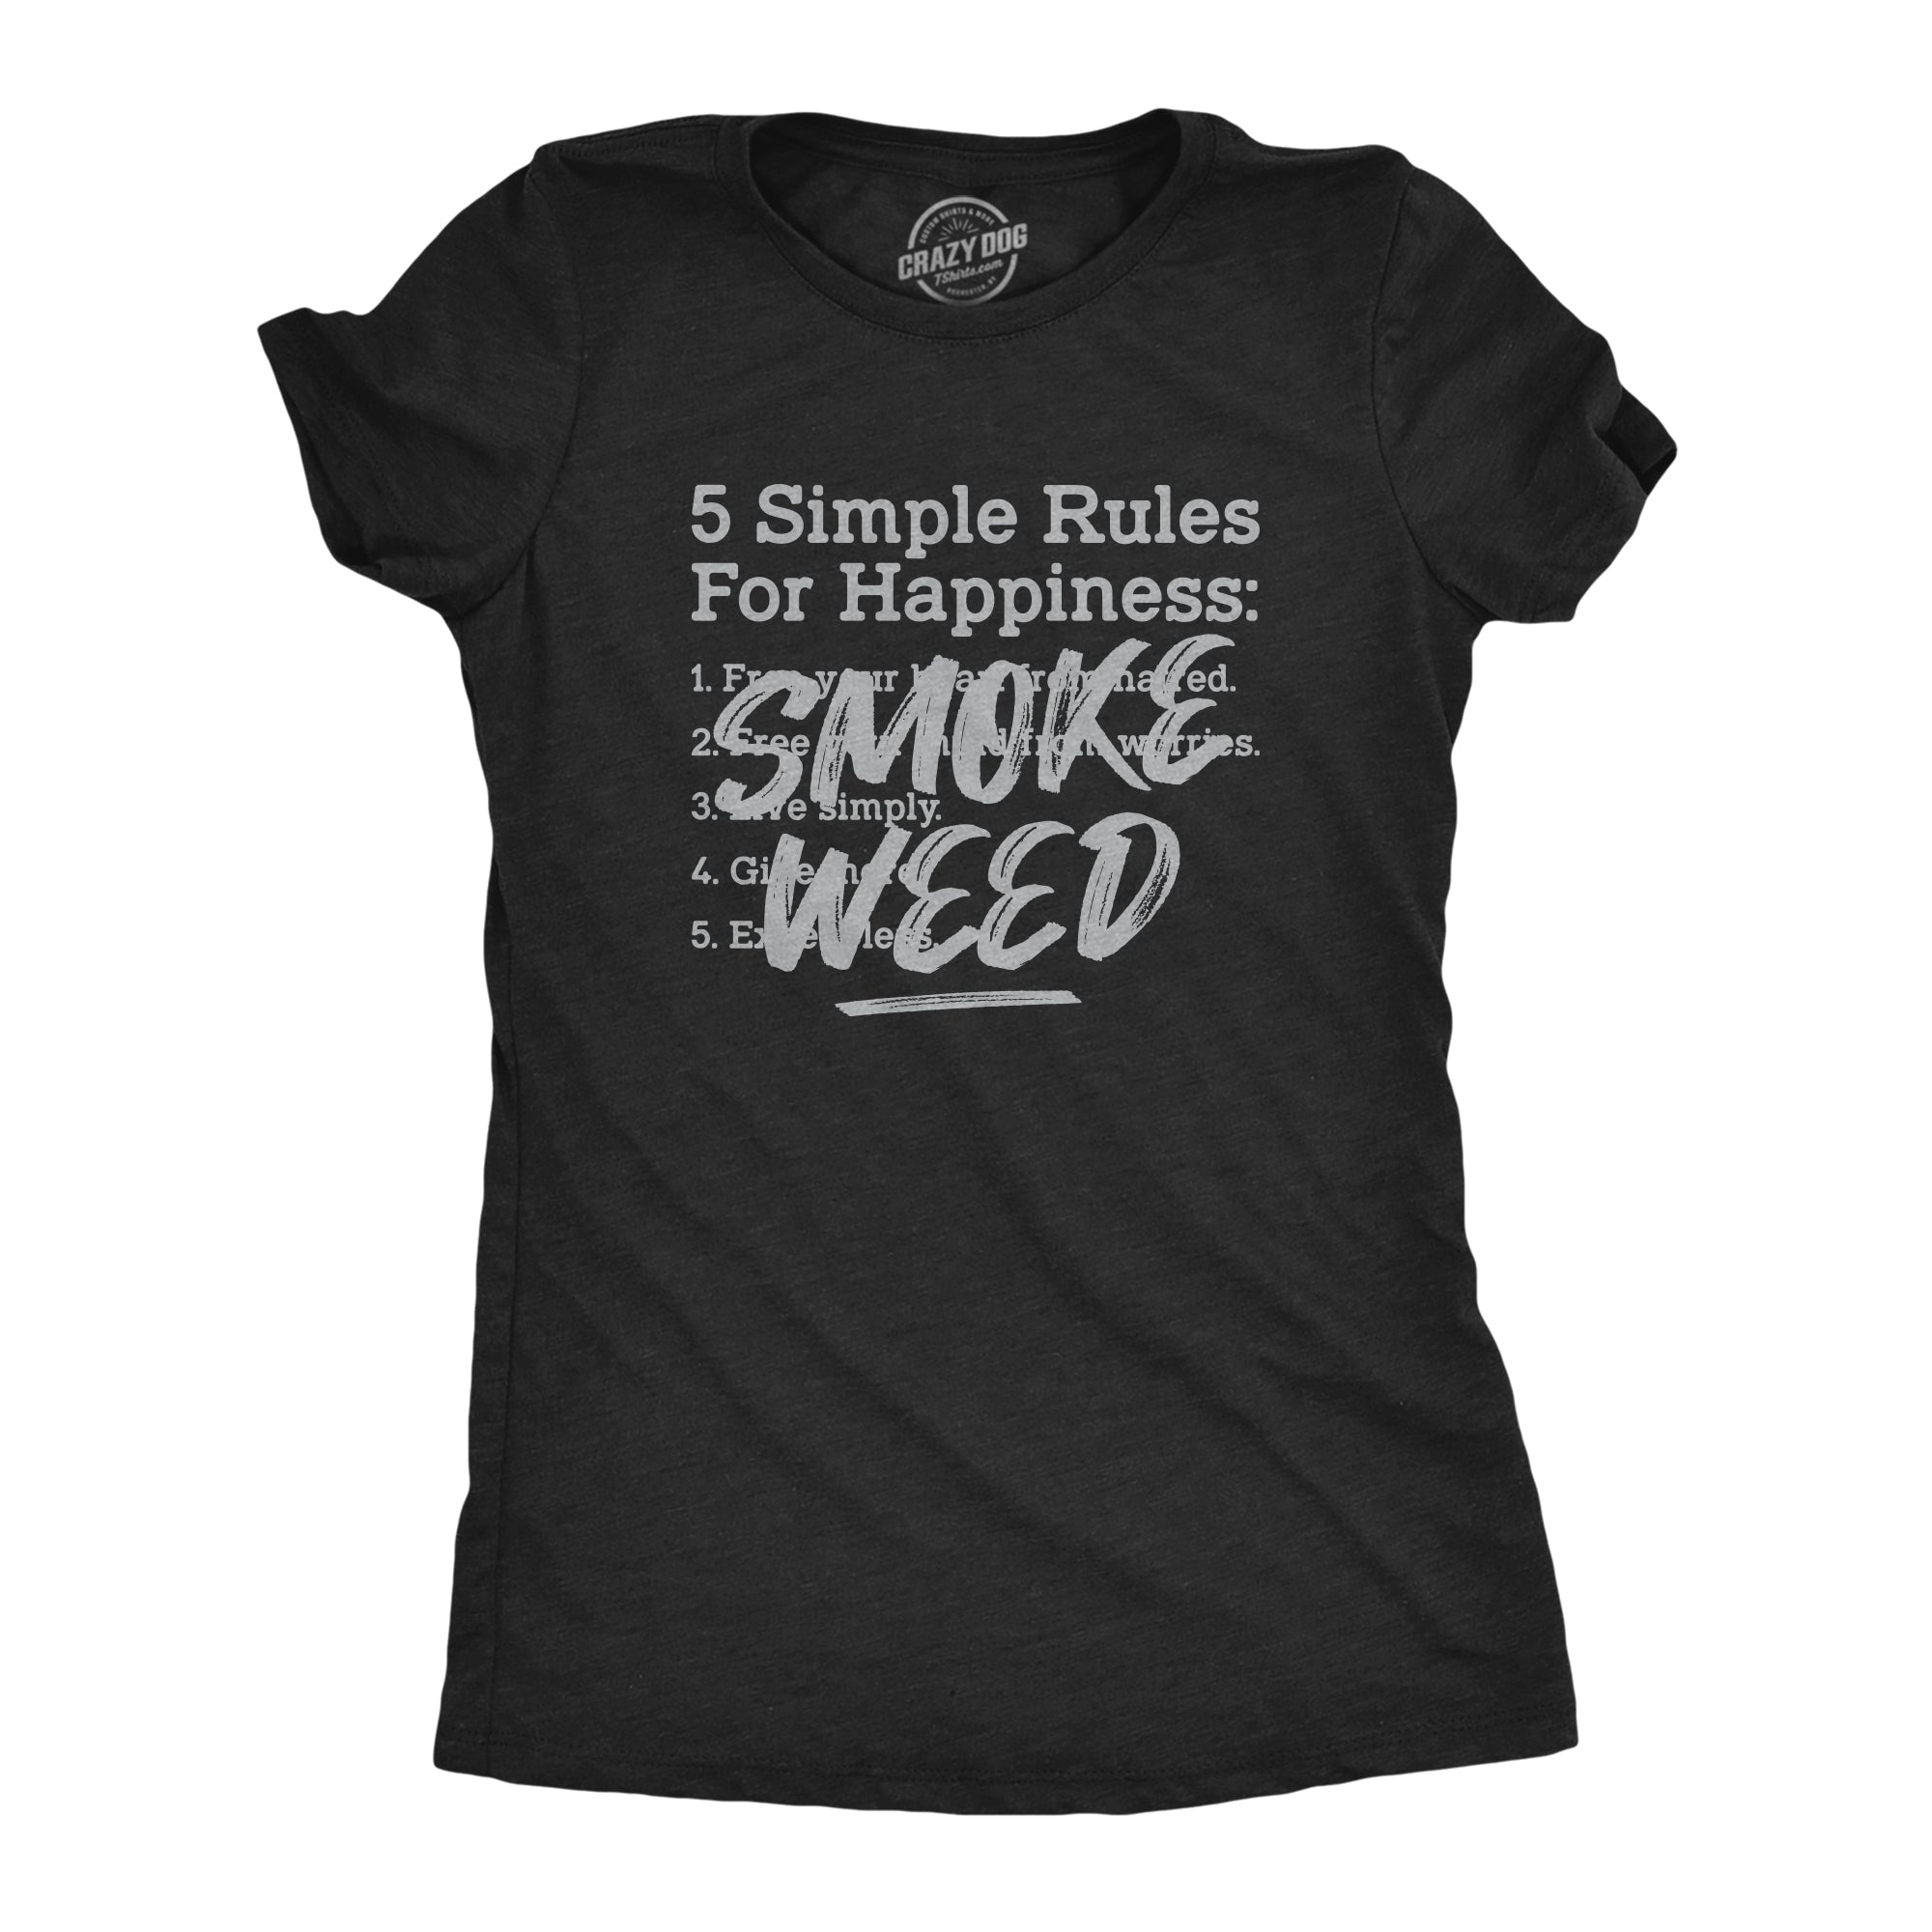 Funny Heather Black 5 Simple Rules For Happiness: Smoke Weed Womens T Shirt Nerdy 420 Motivational Tee